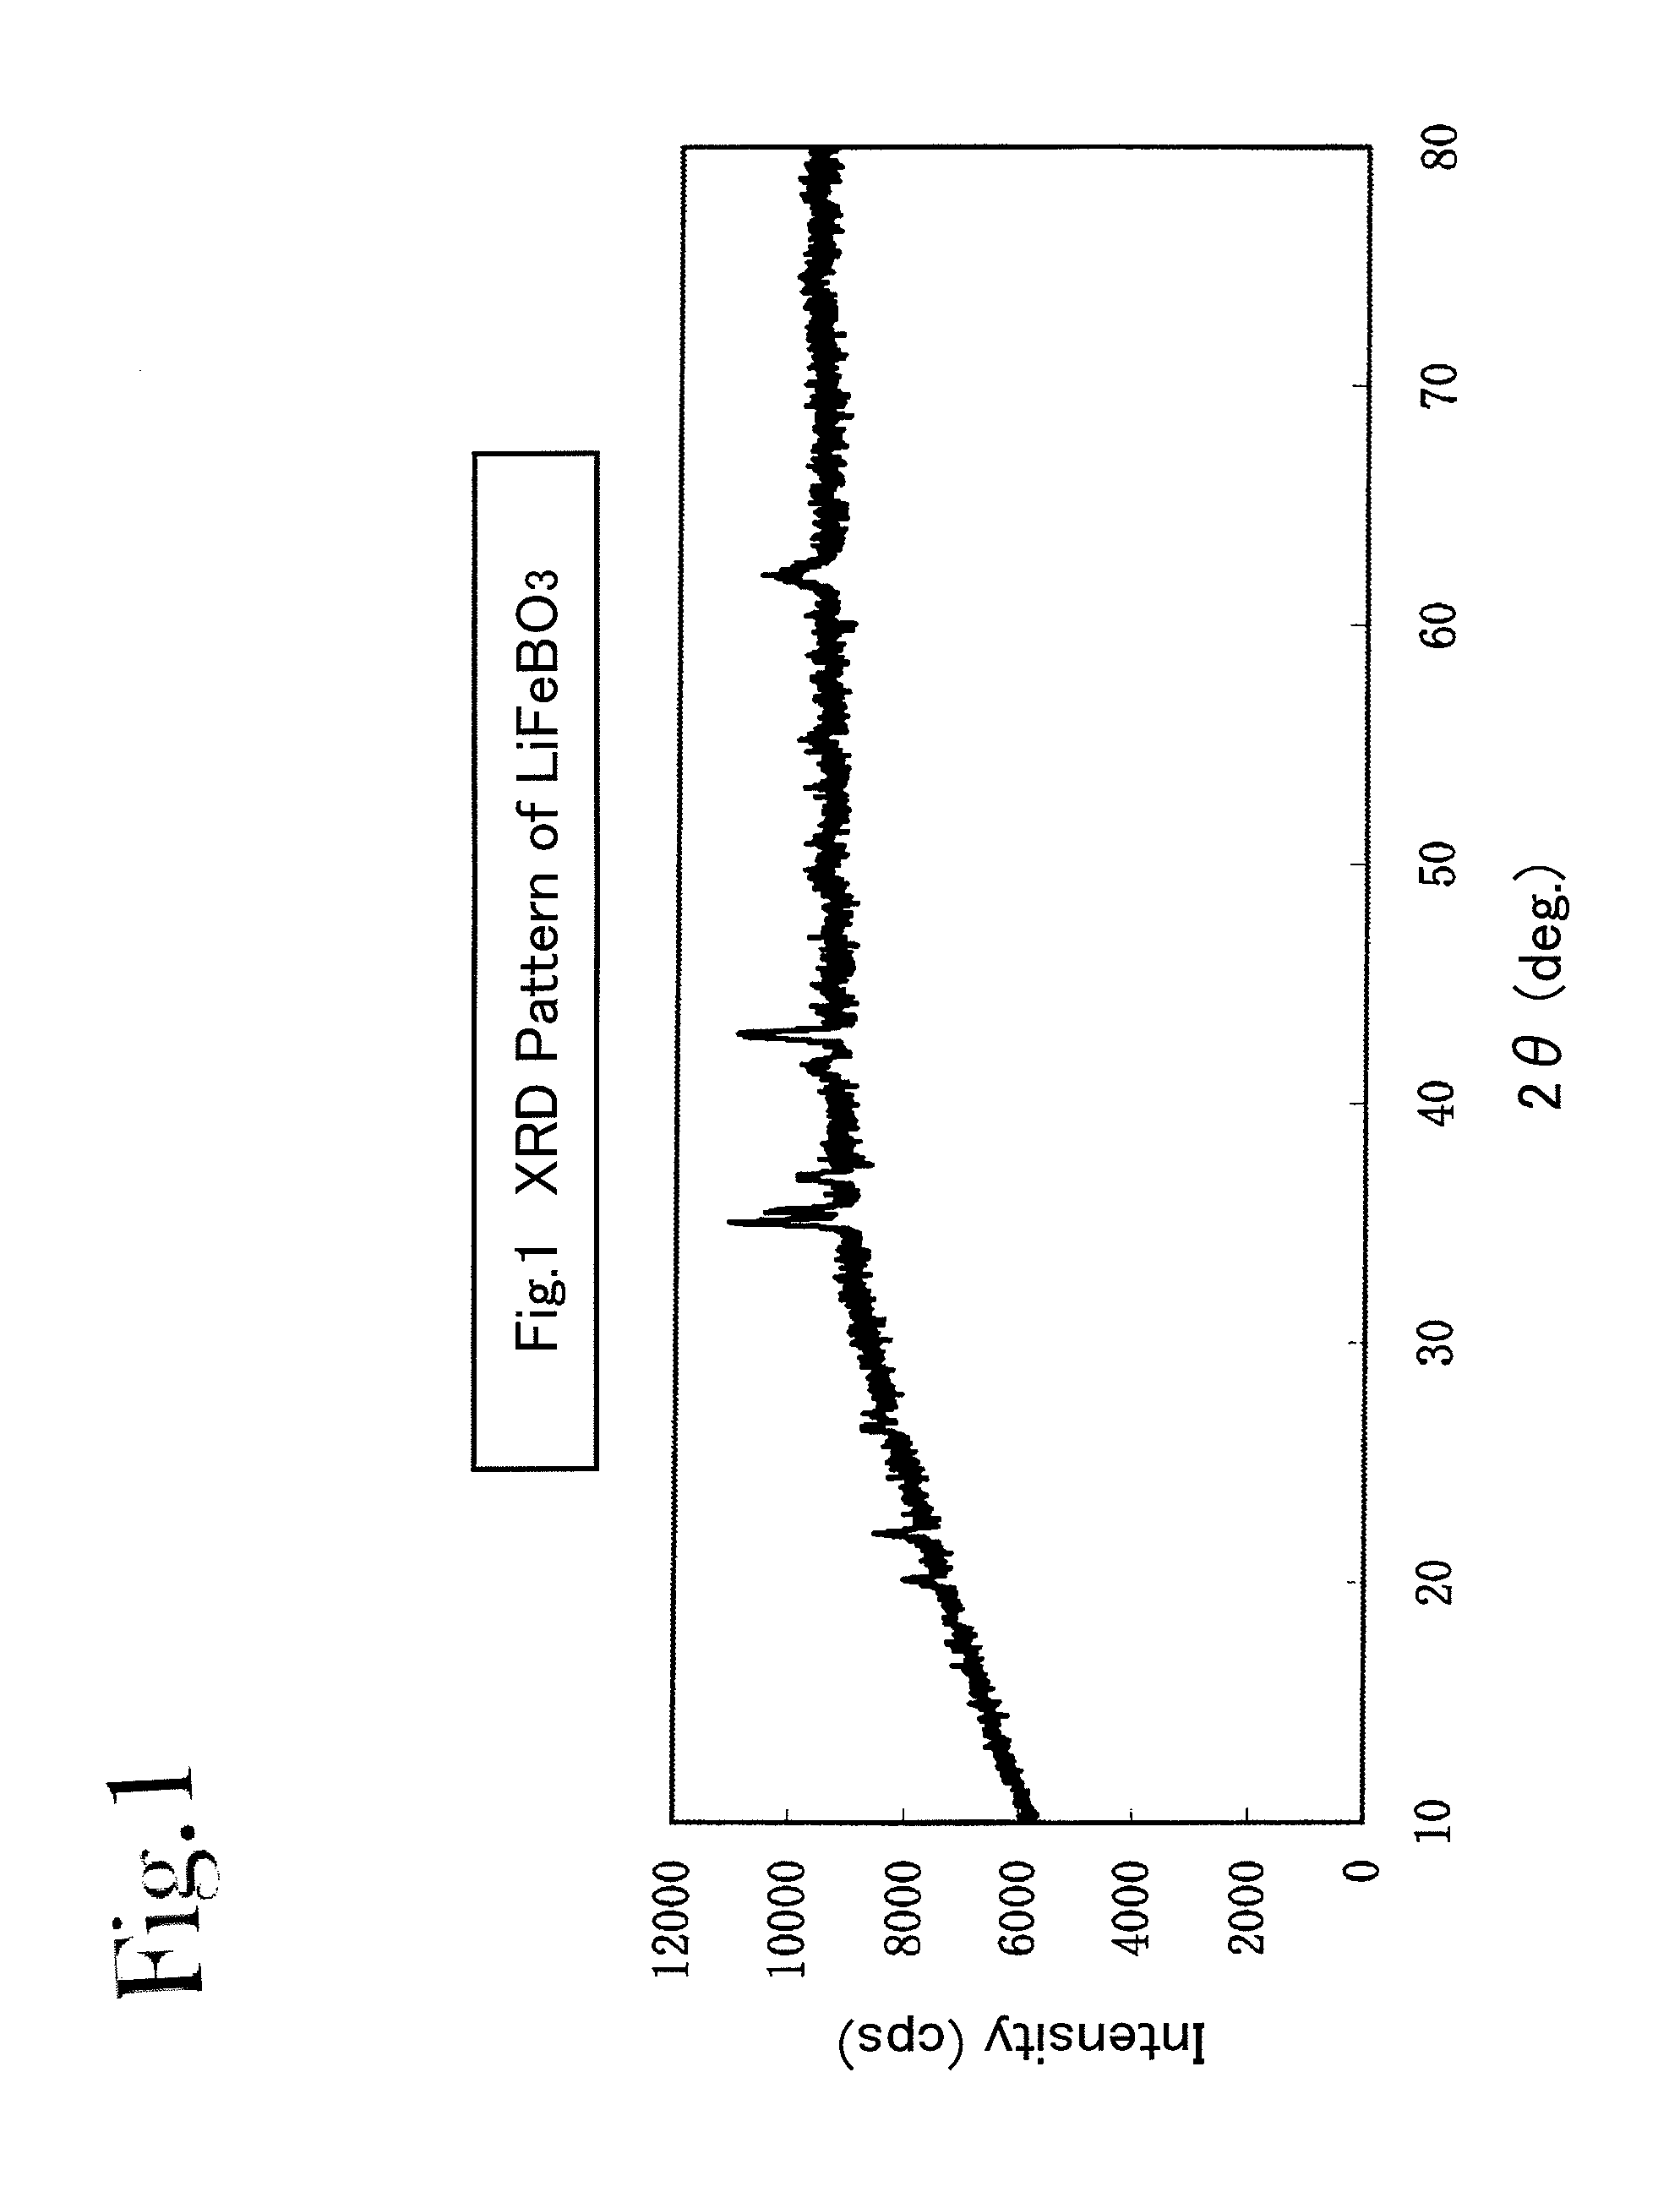 Production process for lithium-borate-system compound